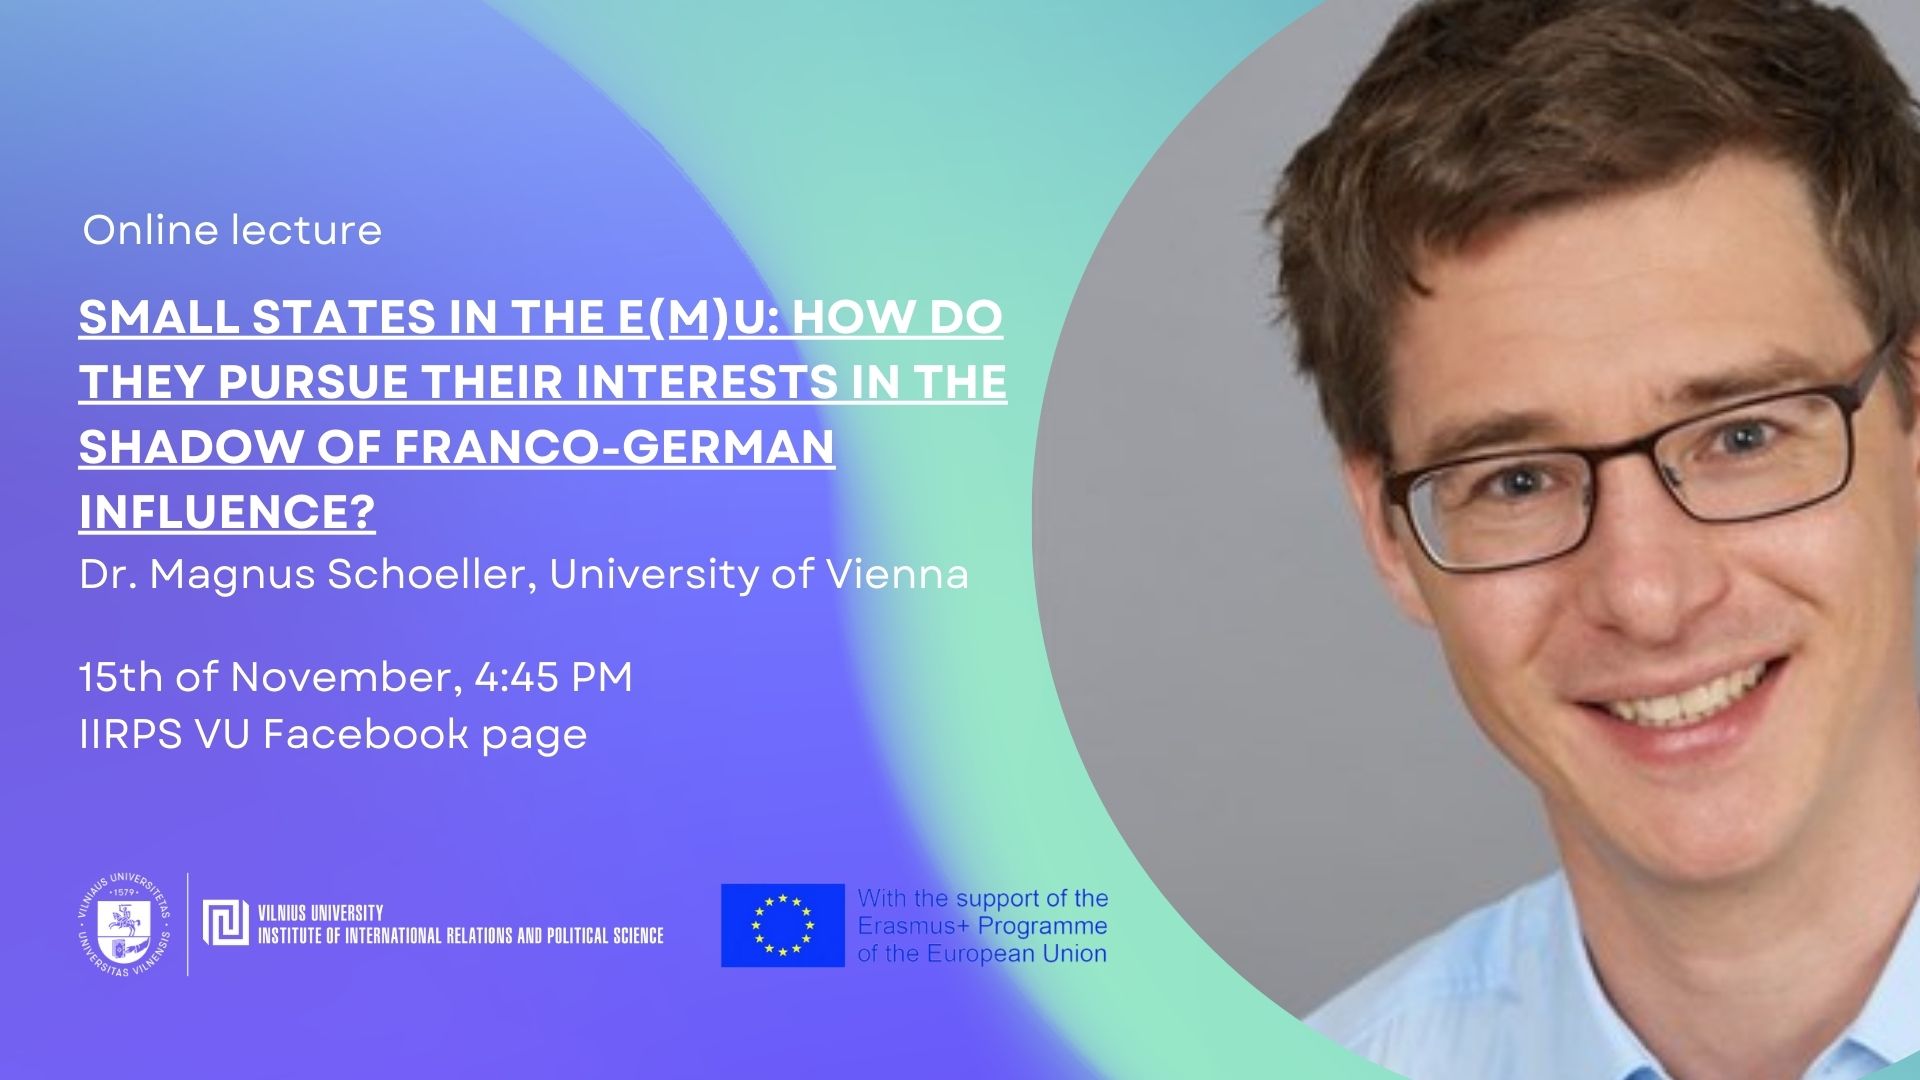 Dr. Magnus Schoeller online lecture “Small states in the E(M)U: How do they pursue their interests in the shadow of Franco-German influence?”